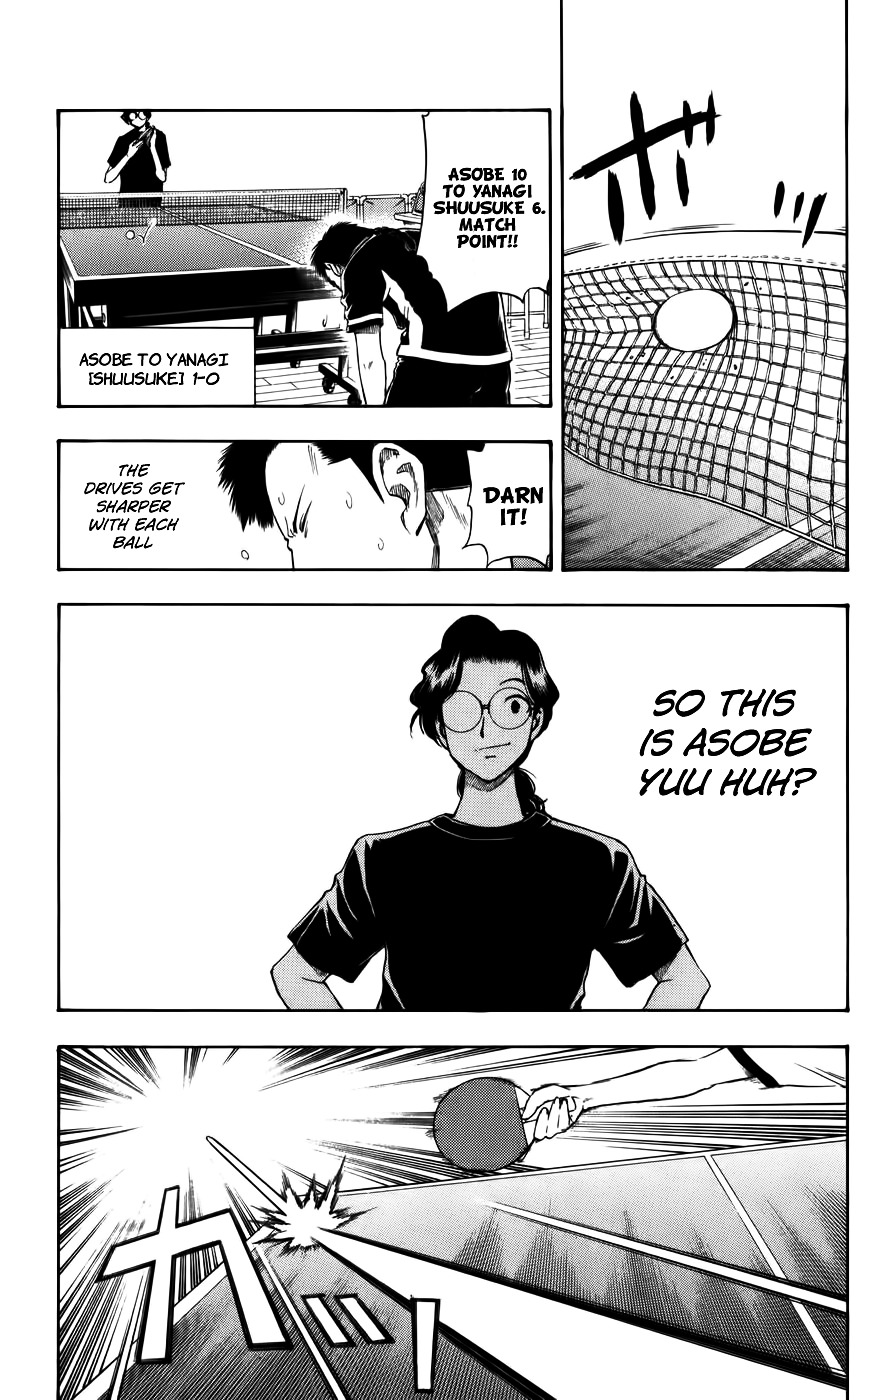 P2! - Let's Play Pingpong! - Page 2